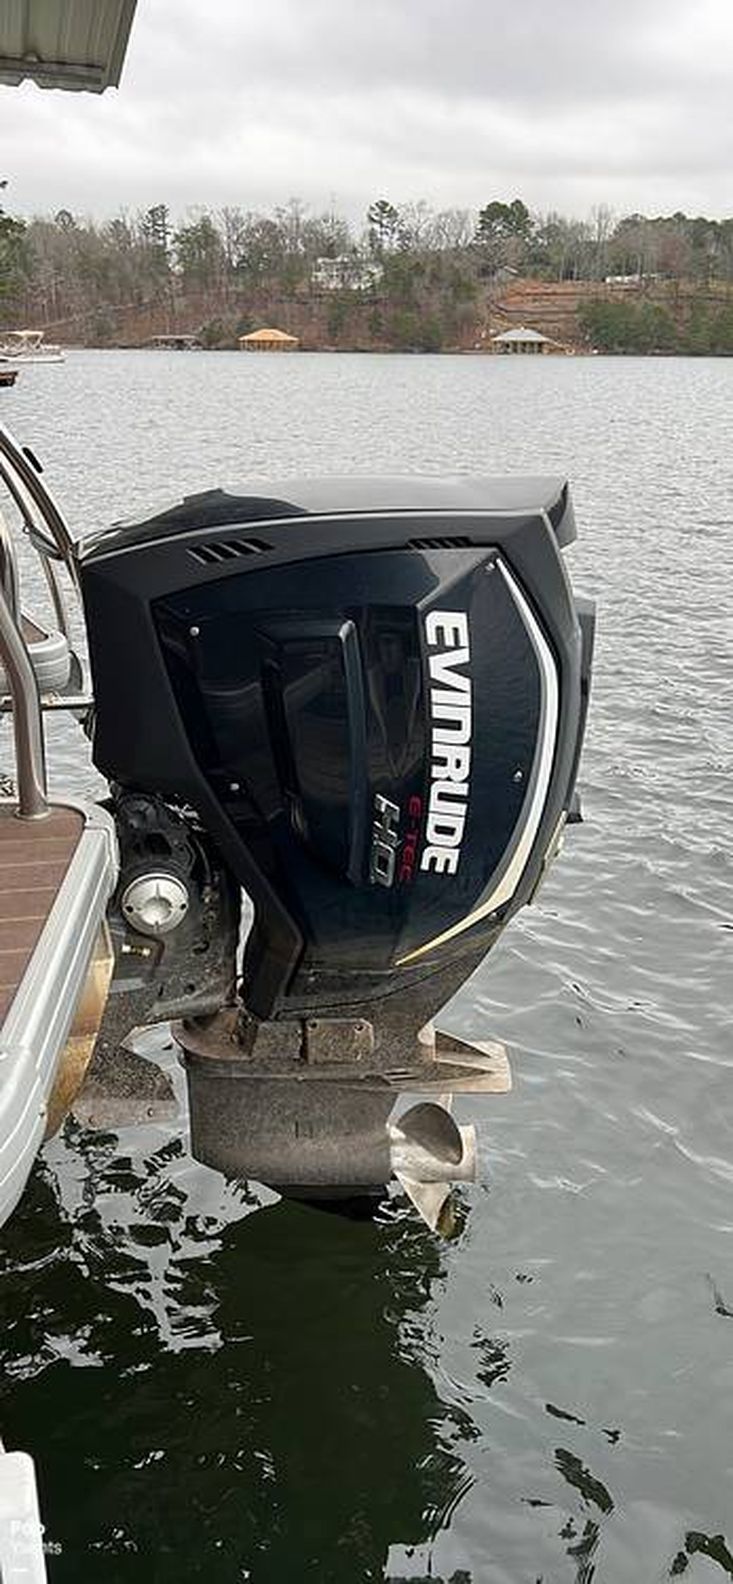 2019 Evinrude sweetwater 255 sdp